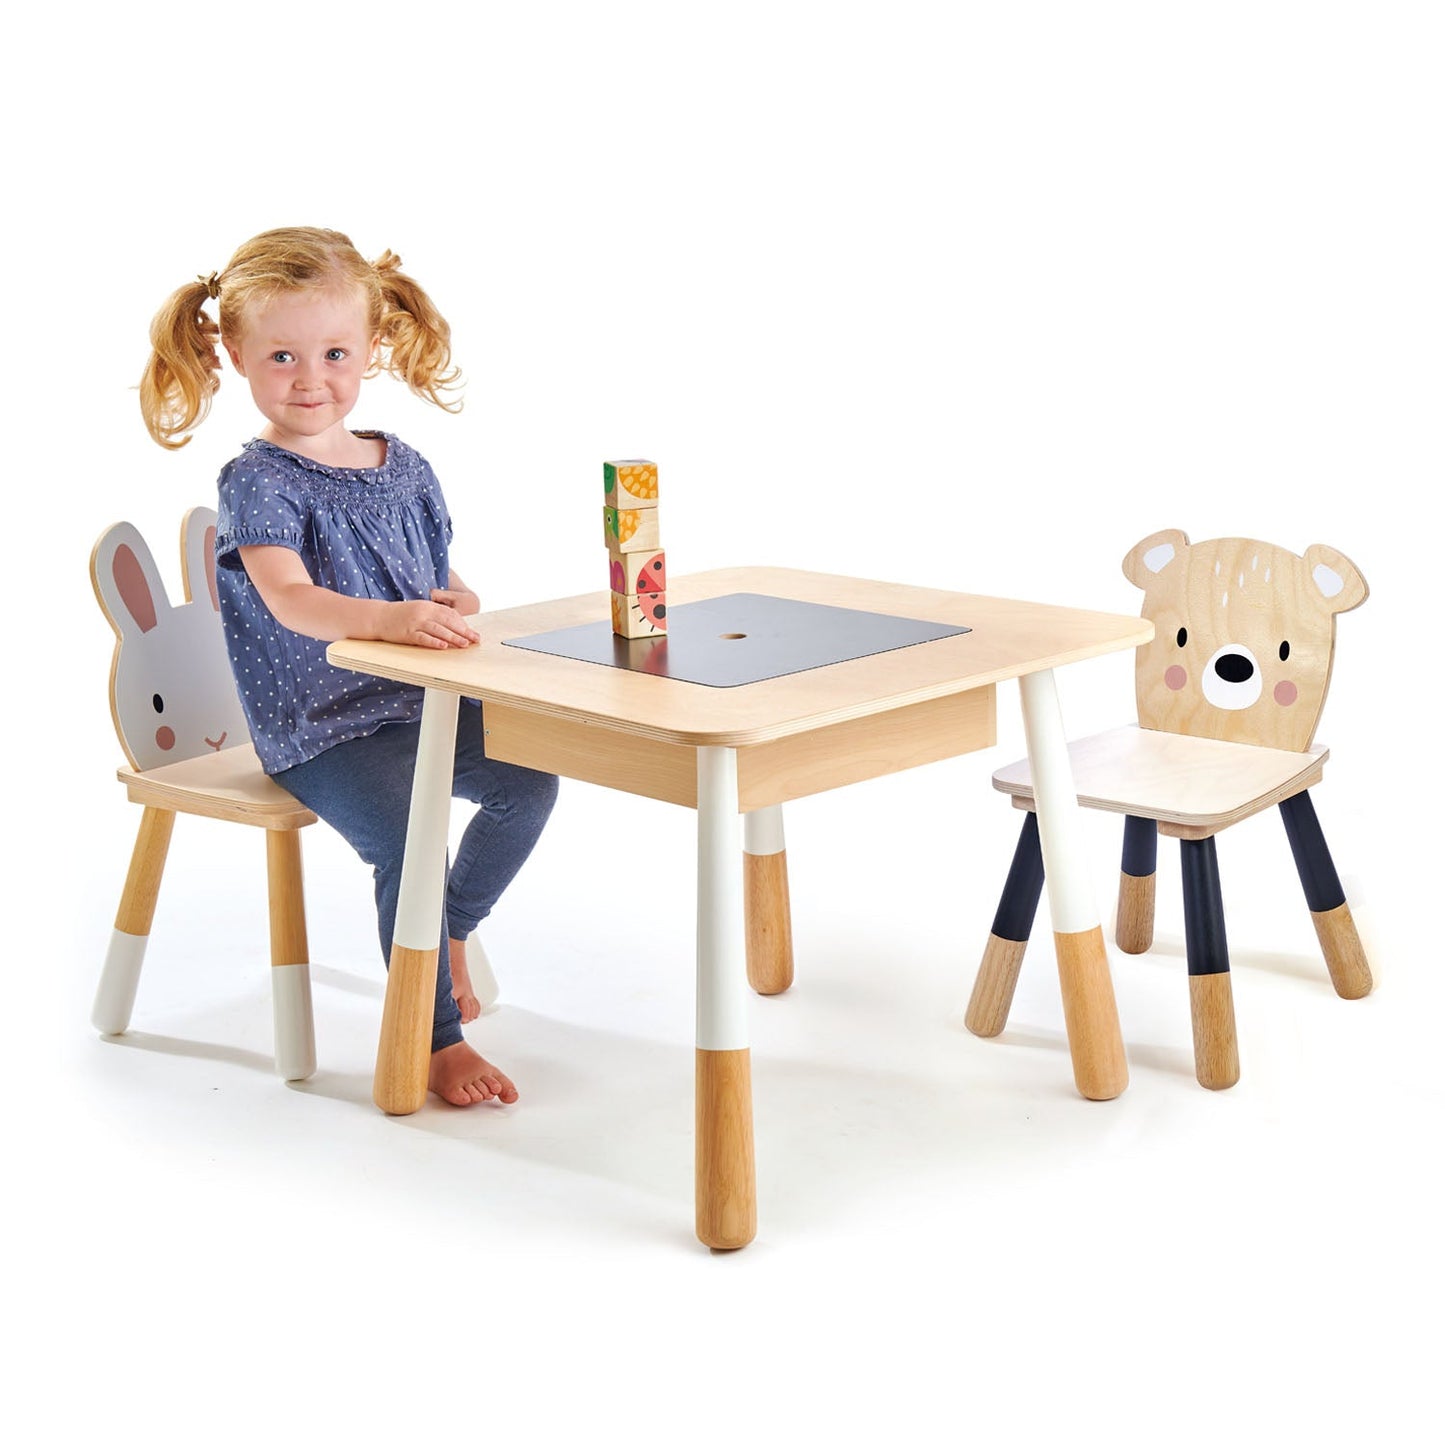 Tender Leaf Toys Forest Table & Chairs Bundle